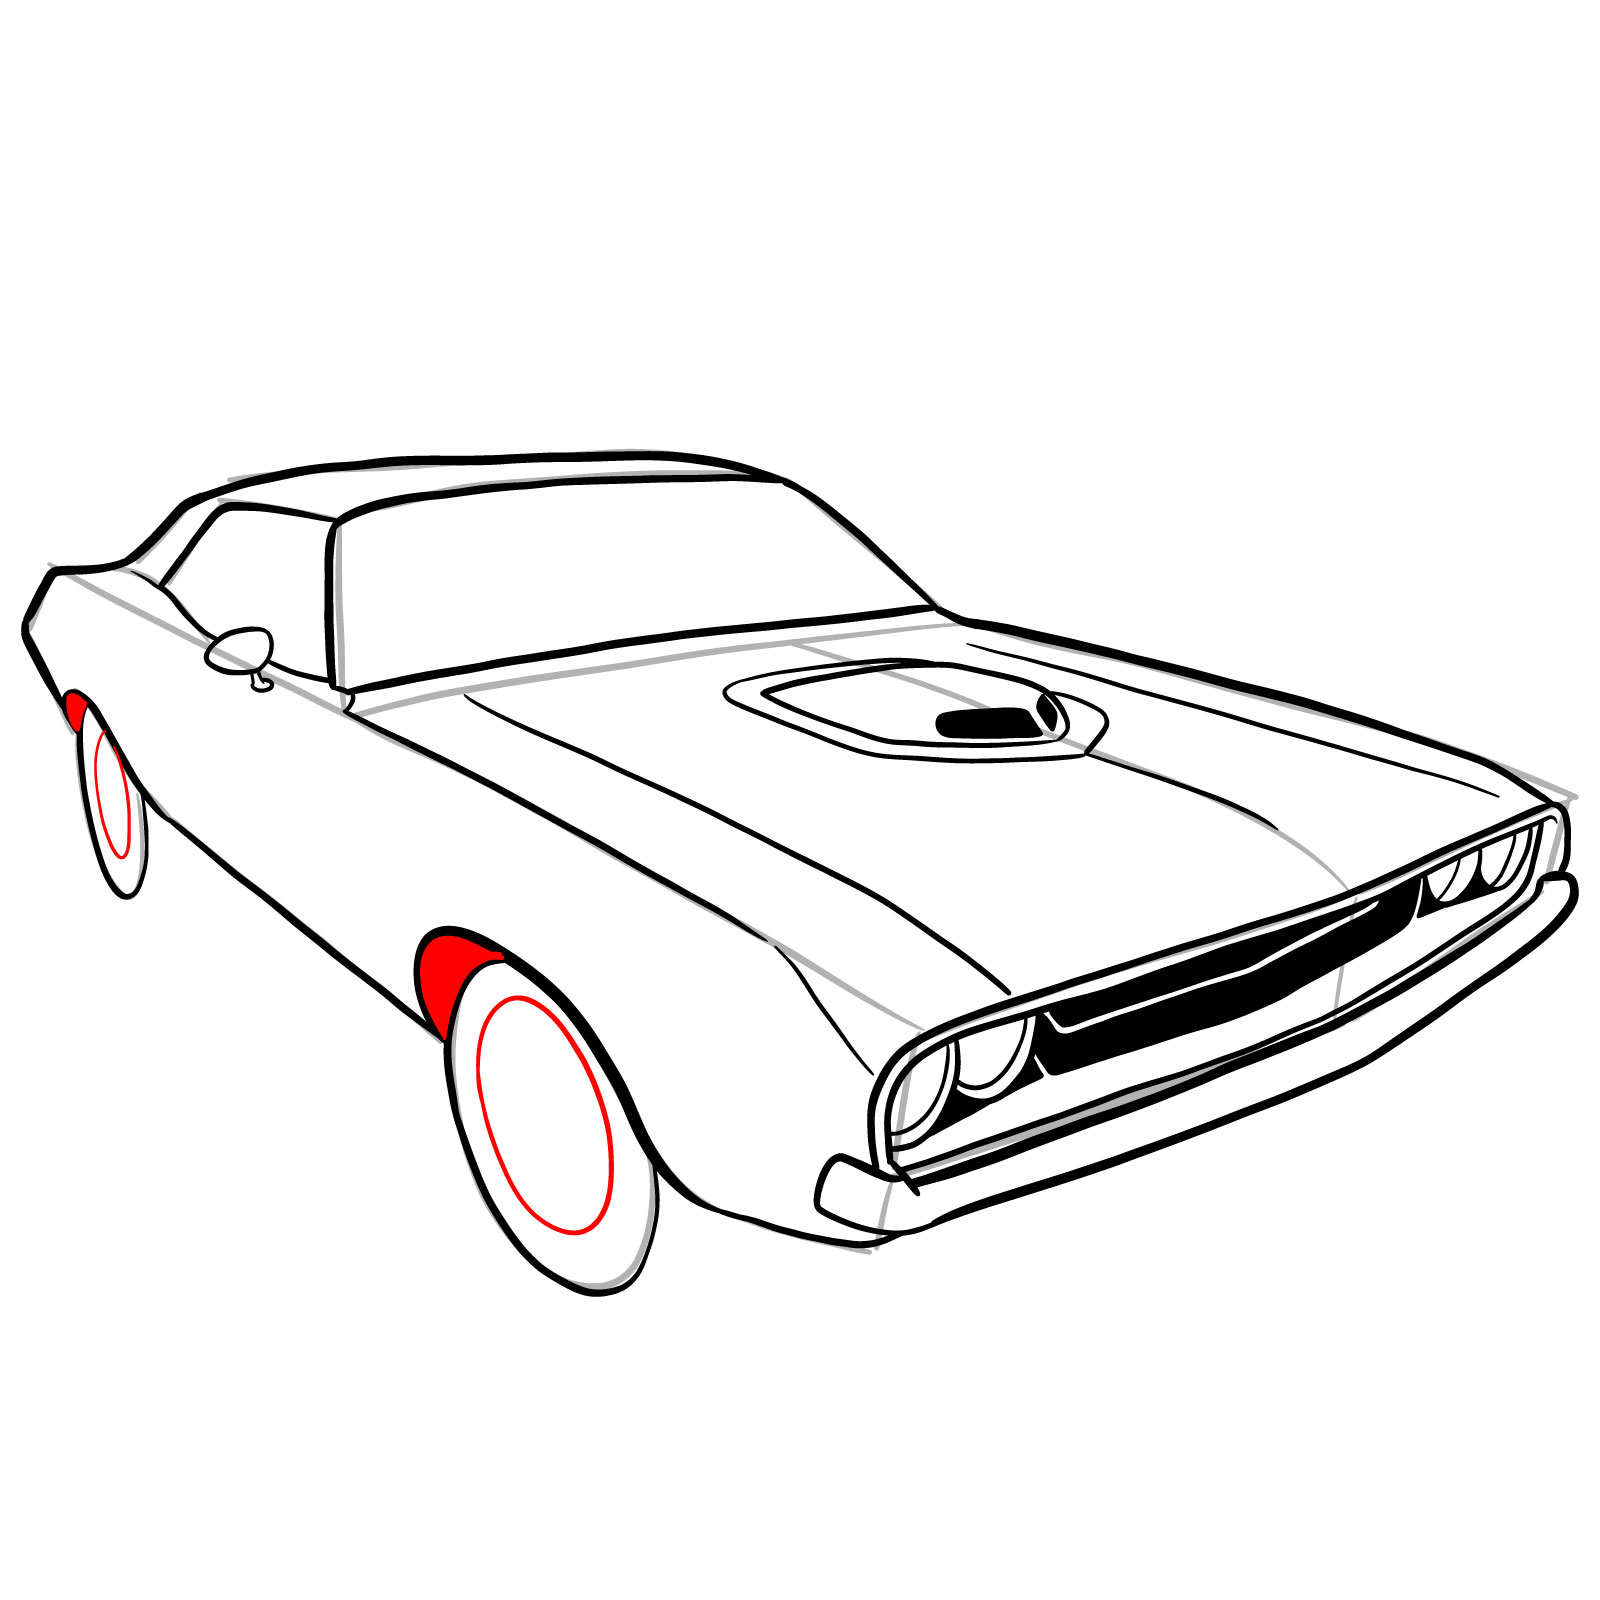 How to draw Dodge Challenger 1970 - step 27